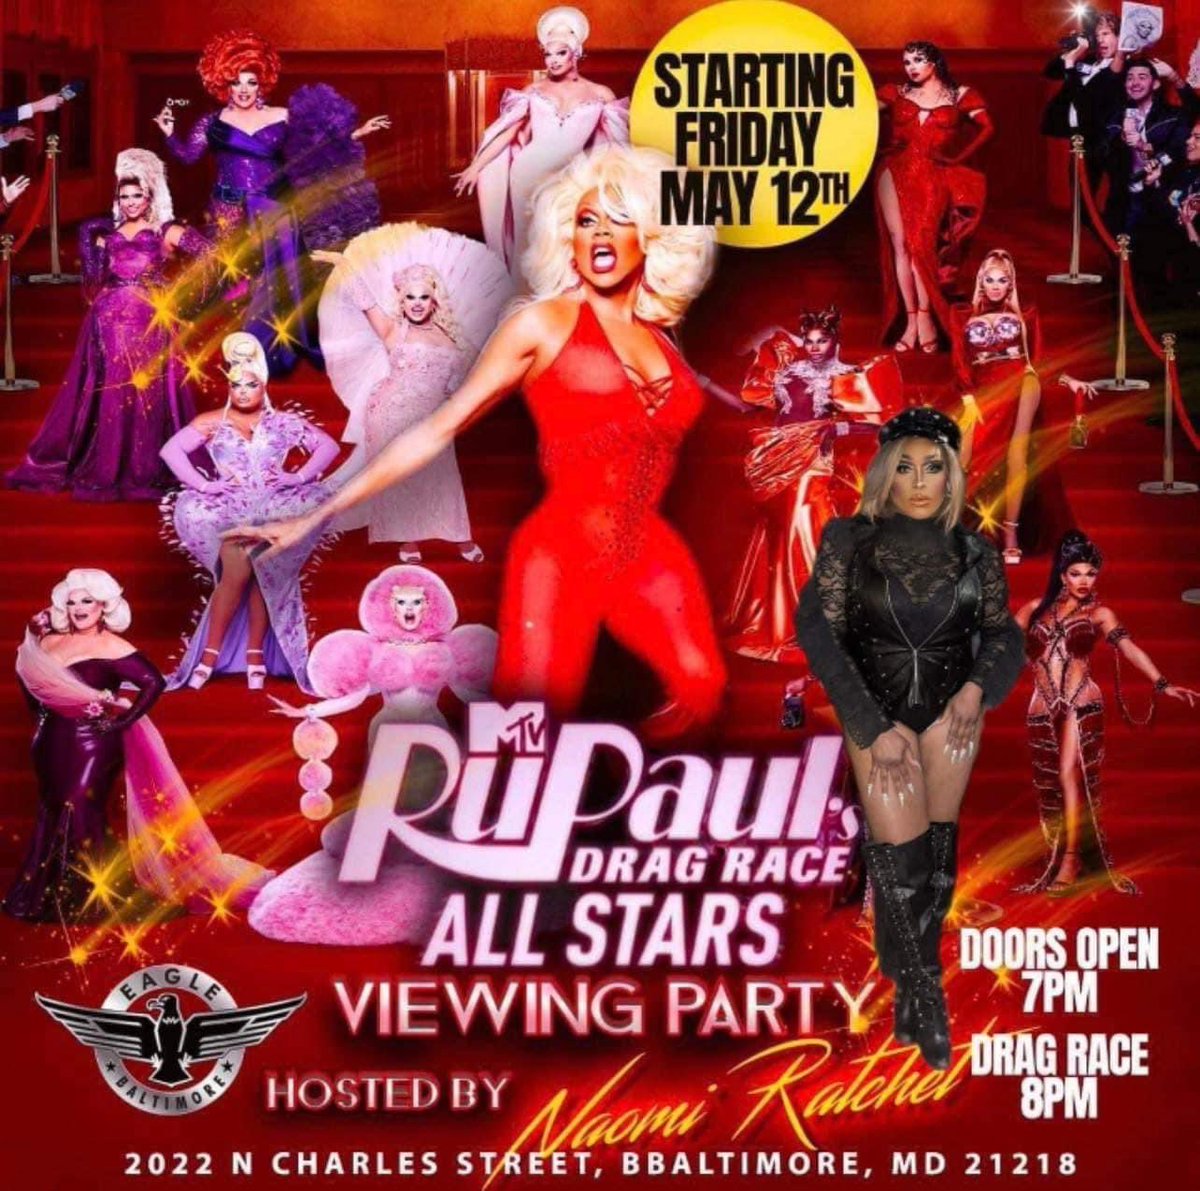 Your weekend at the Eagle #clublife #clubs #party #partying #housemusic #technomusic #dj #nightlife #baltimore #followforfollowback #gaypride #gayguy #dragqueen #yas #queen #slay #circuitparty #circuitmusic #throwback #brunch #lgbtqcommunity #baltimore